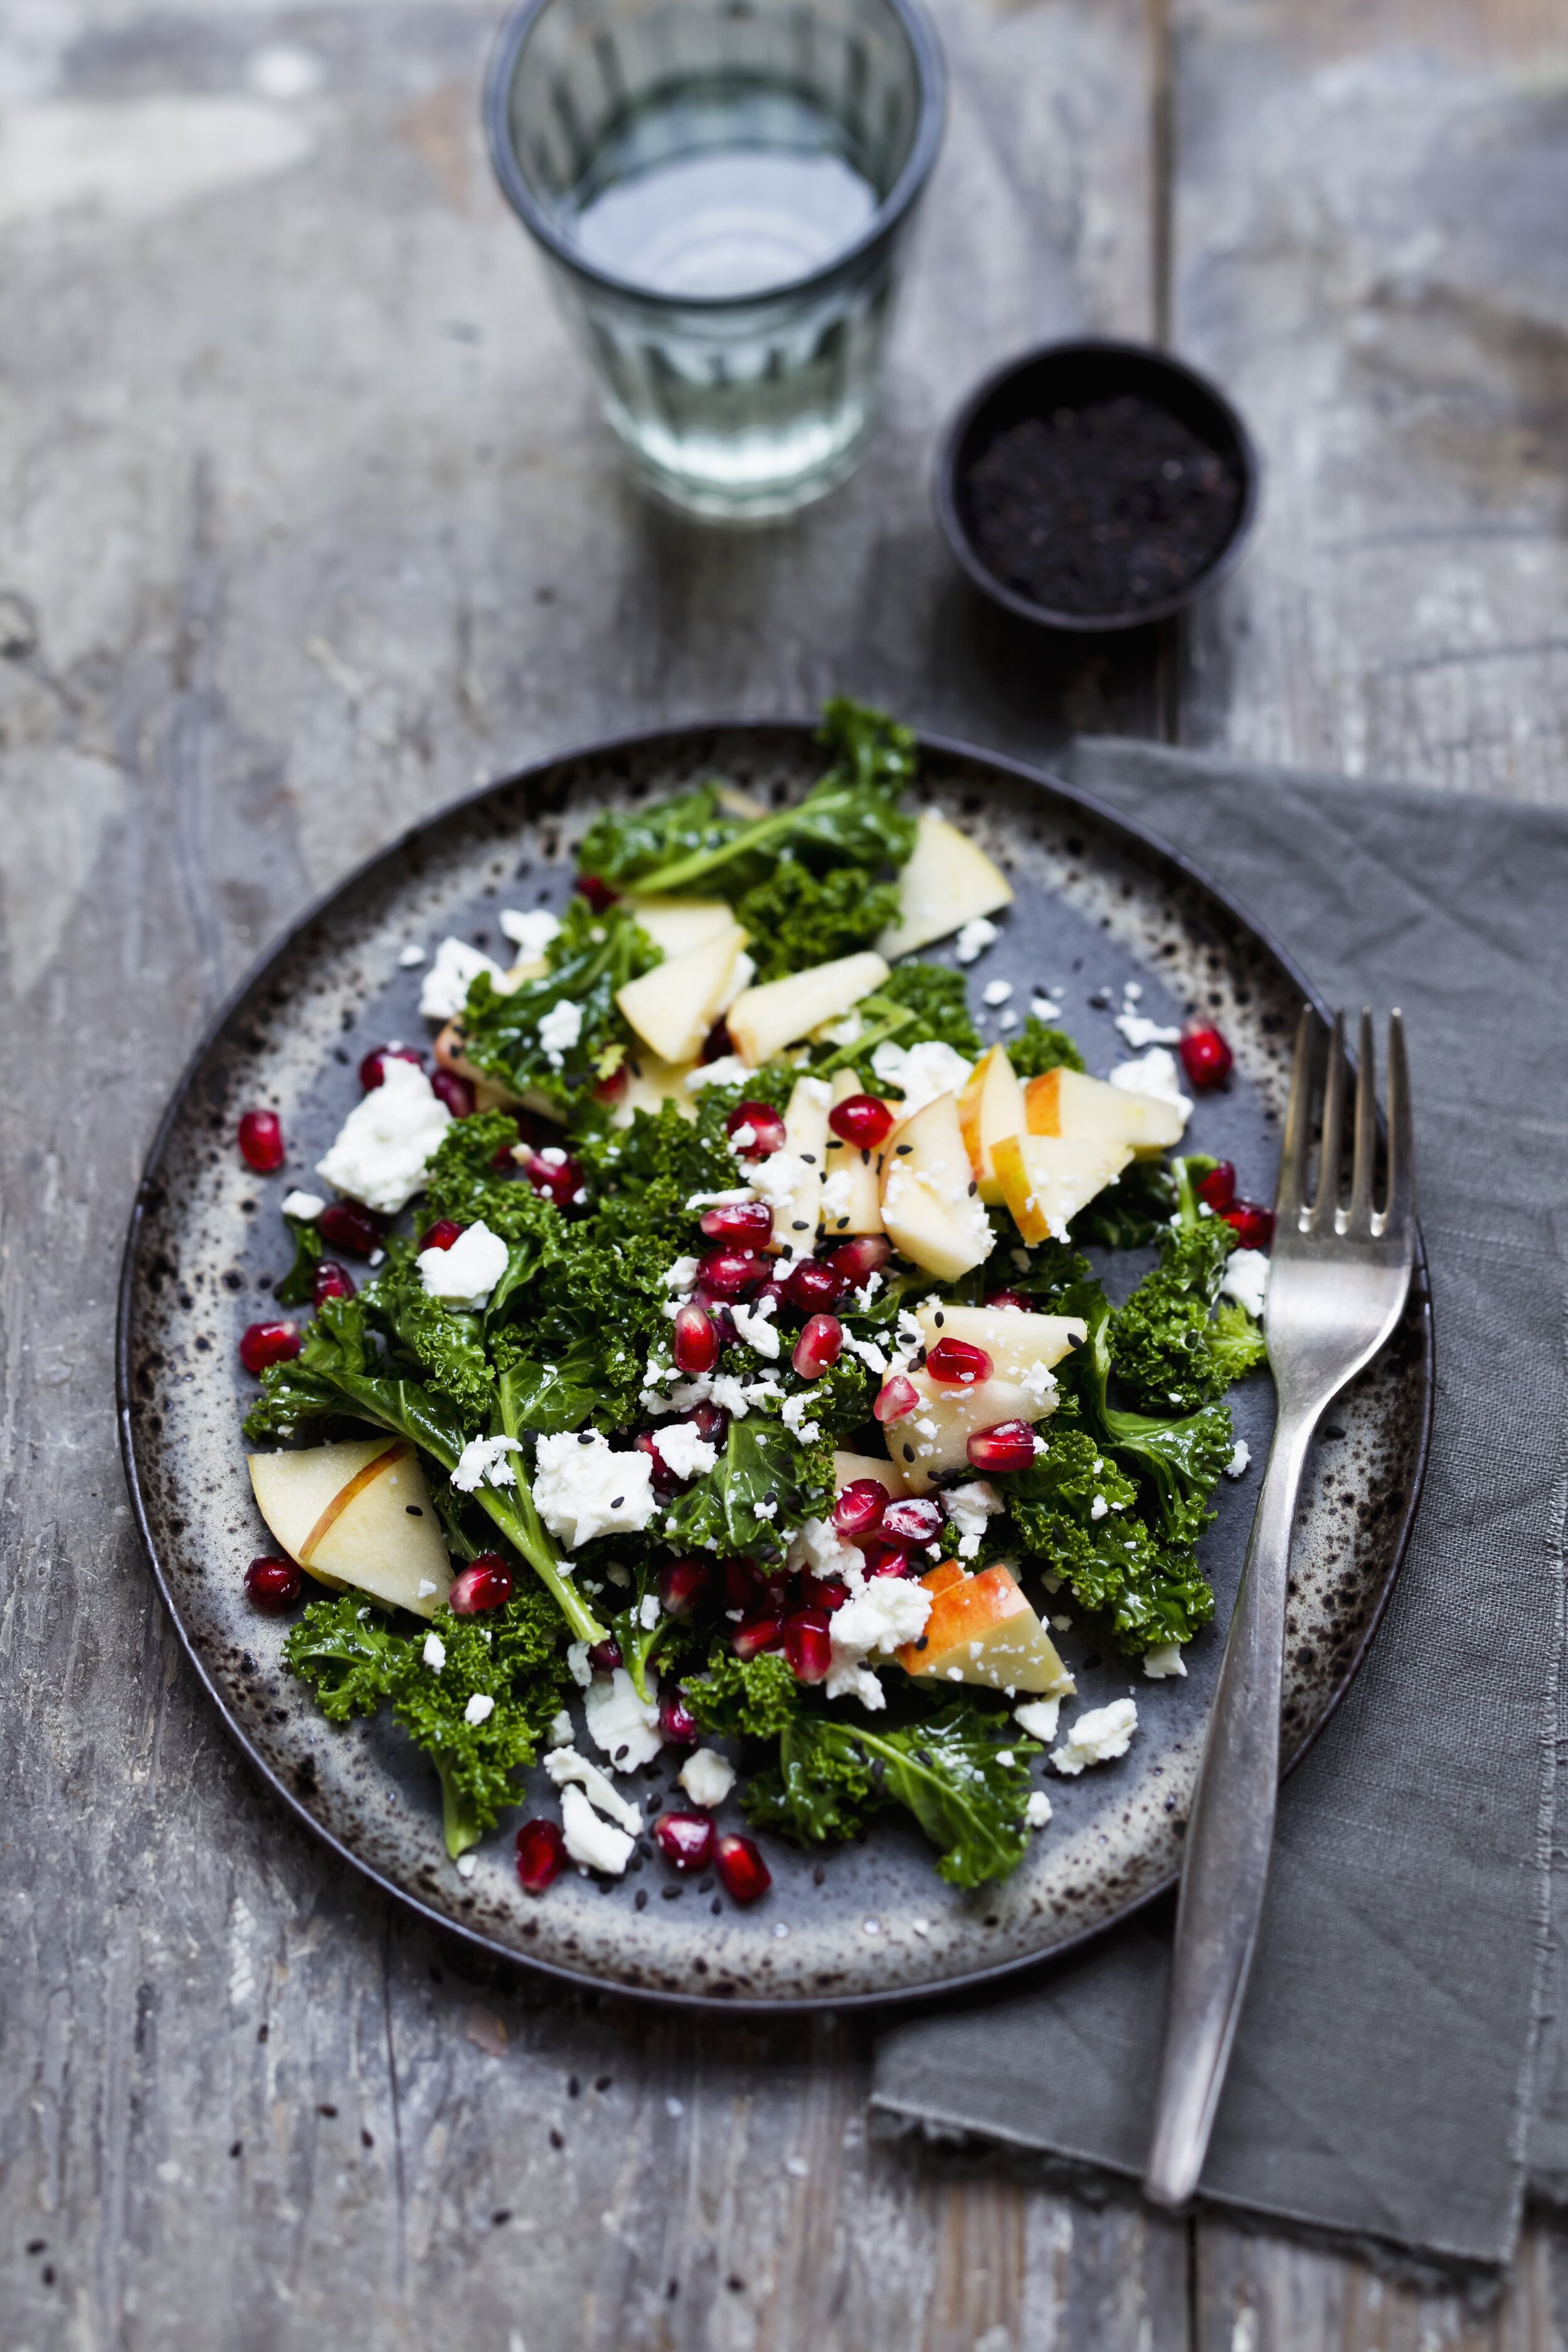 HiRes_A_curly_kale_salad_with_pomegranate_seeds_sheep_s_cheese_and_apple_slices.jpg